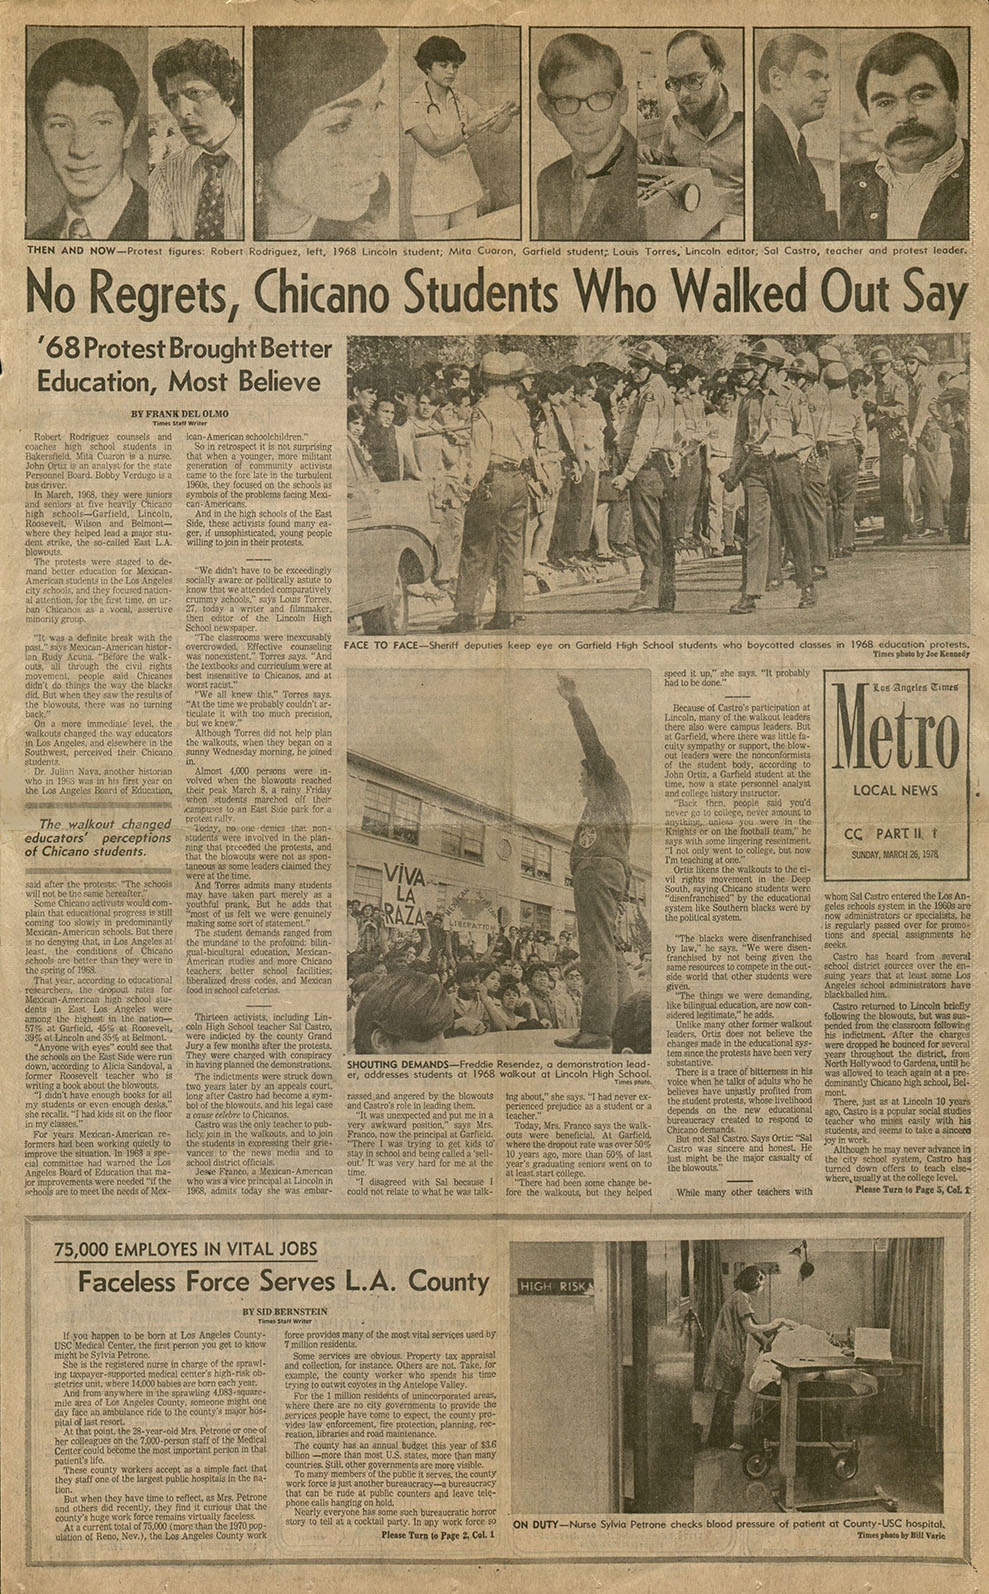 Los Angeles Times, Metro Section Cover, with article on the March 1, 1968 Chicano Student Walkout.